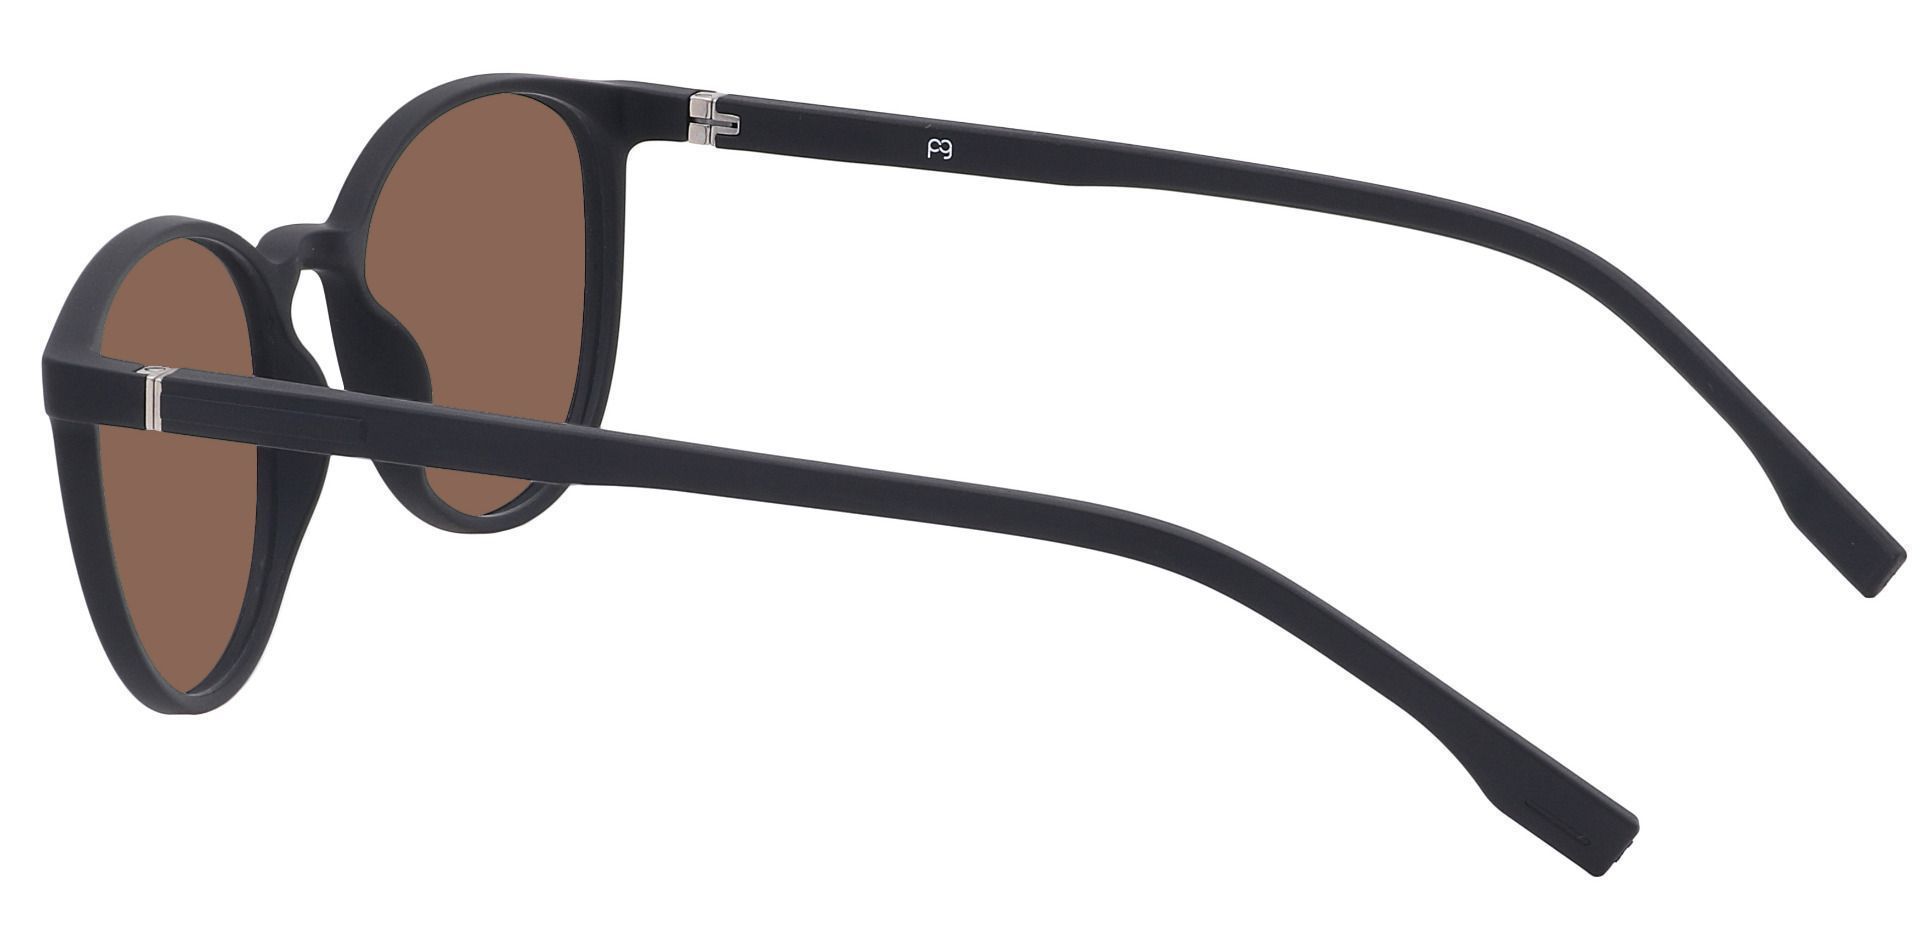 Bay Round Non-Rx Sunglasses - Black Frame With Brown Lenses